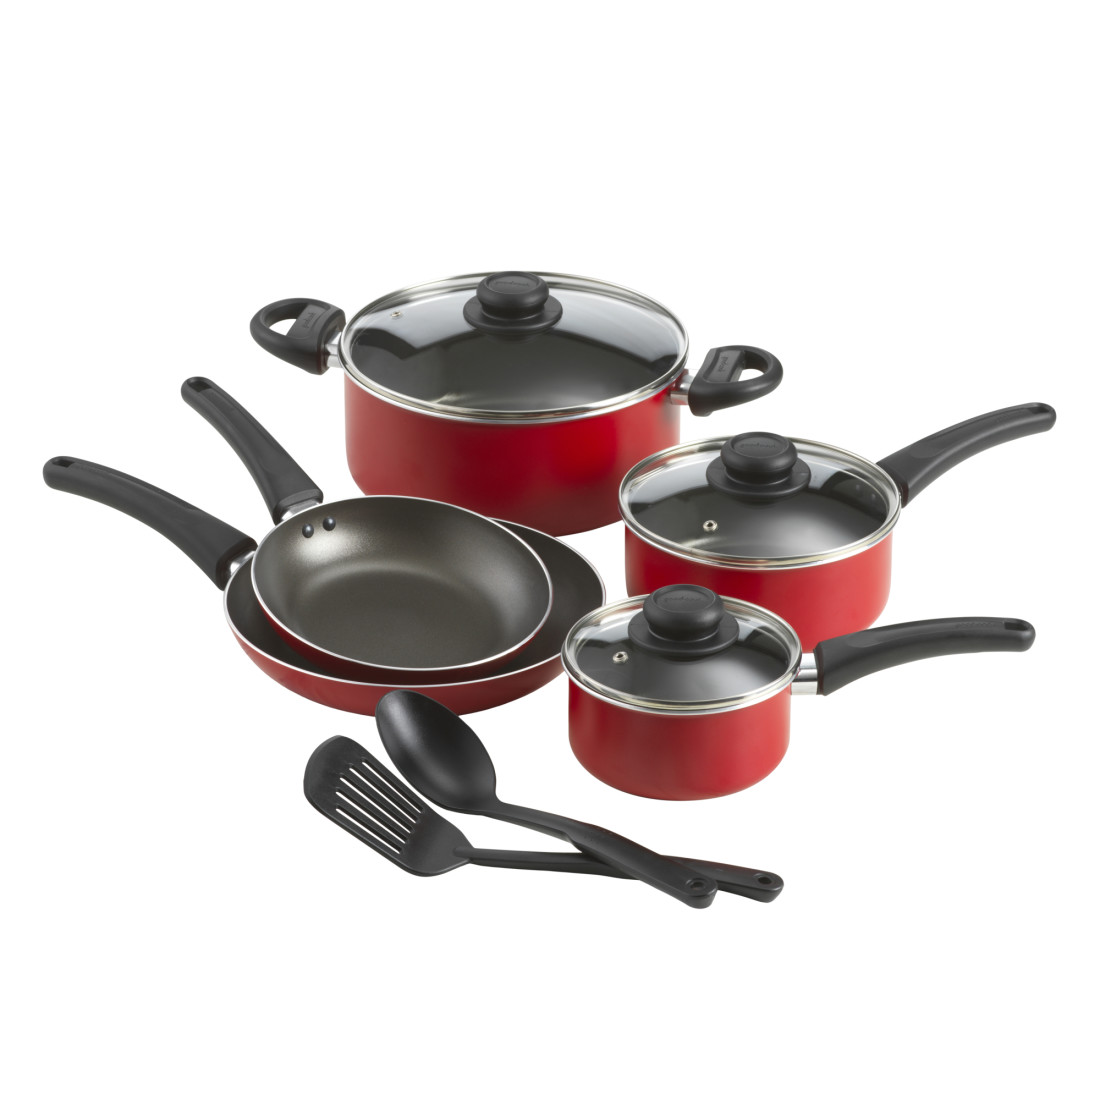 Greater Goods Party of Four Cook Kit - 10 Piece Nonstick Cookware